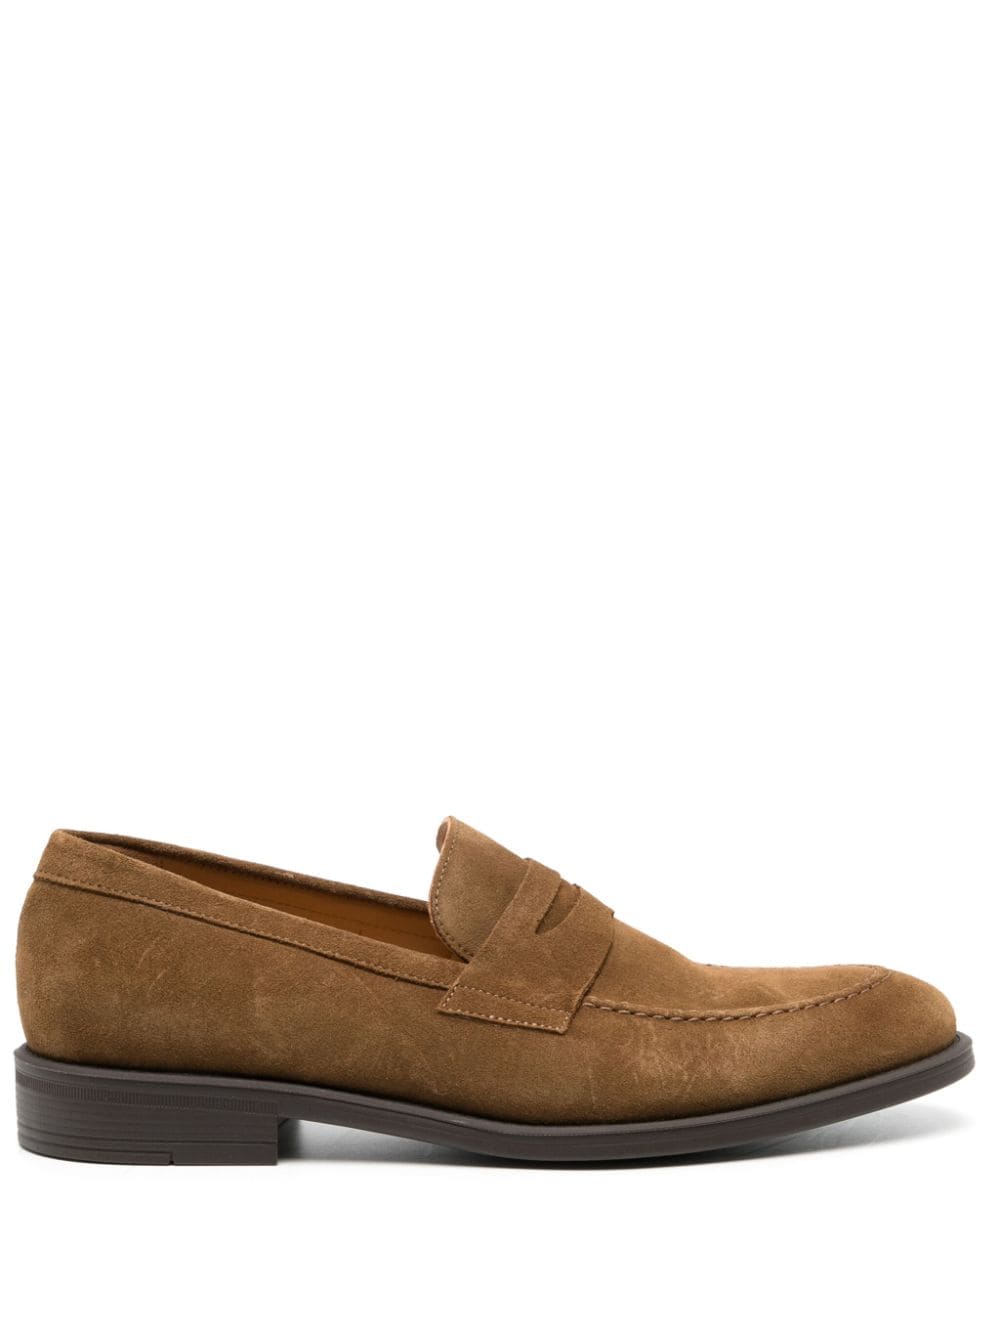 Paul Smith Remi suede loafers - Brown von Paul Smith